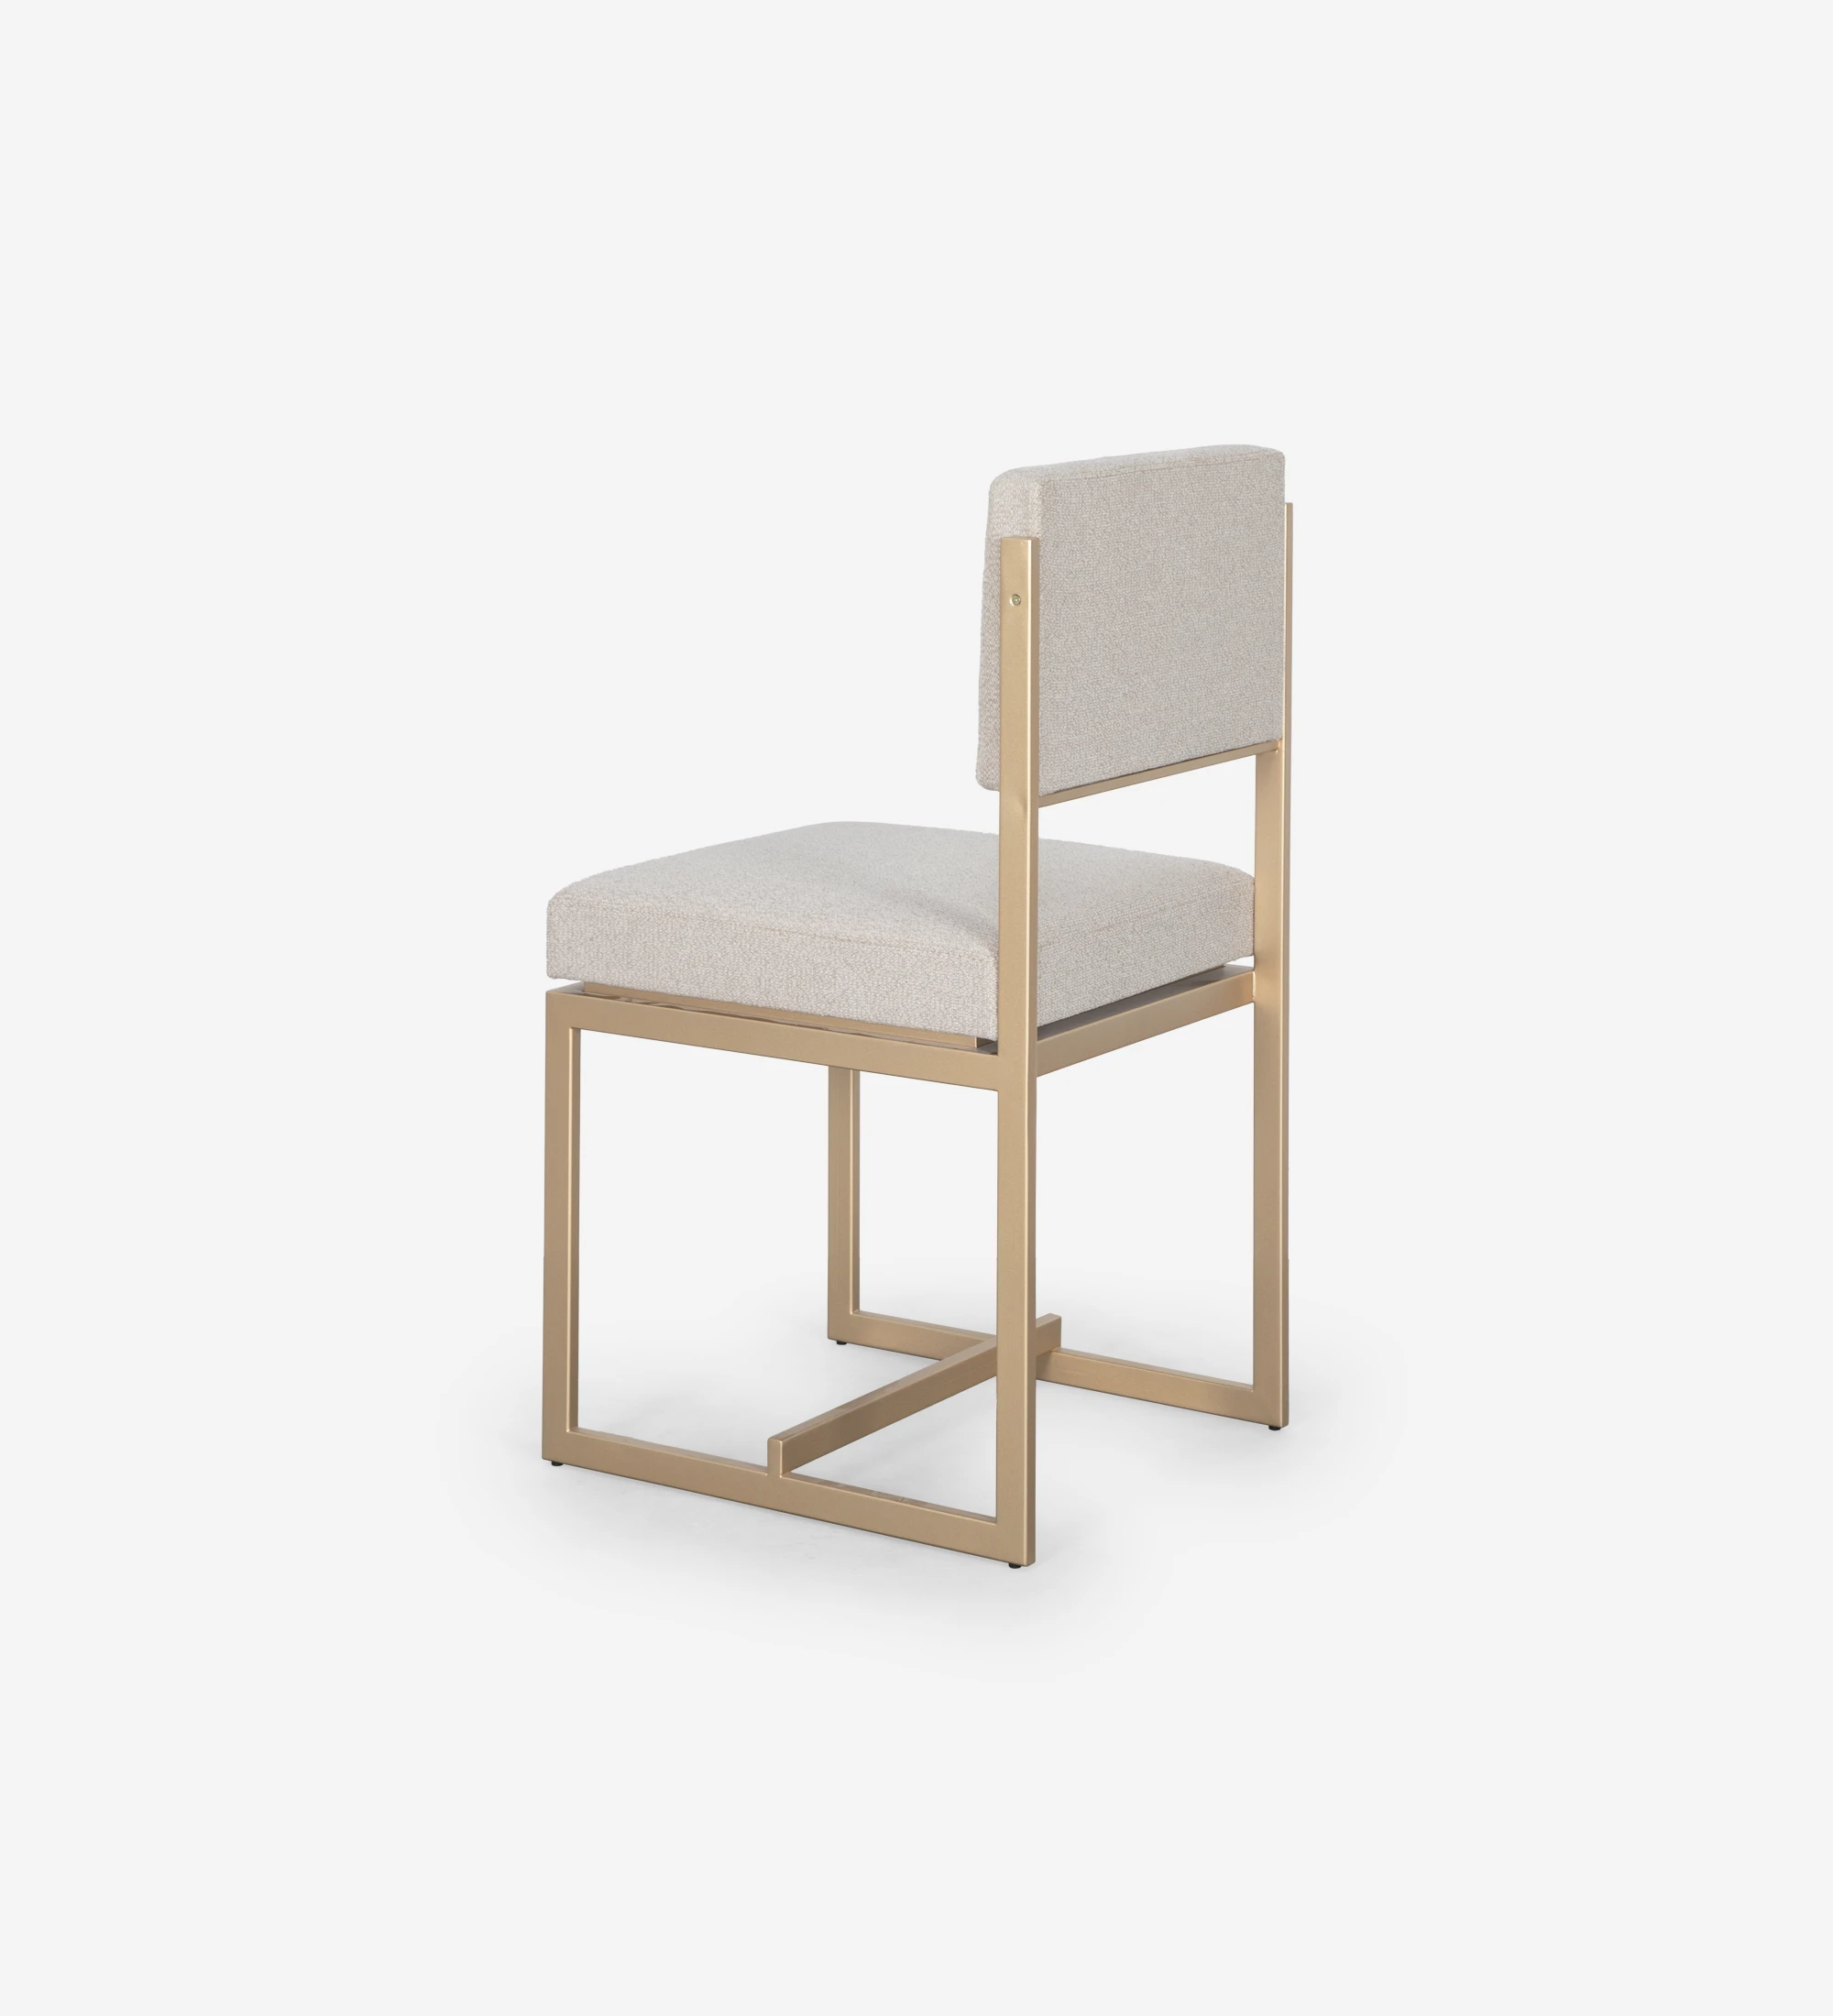 Chair with seat and back upholstered in fabric, with gold lacquered metal structure